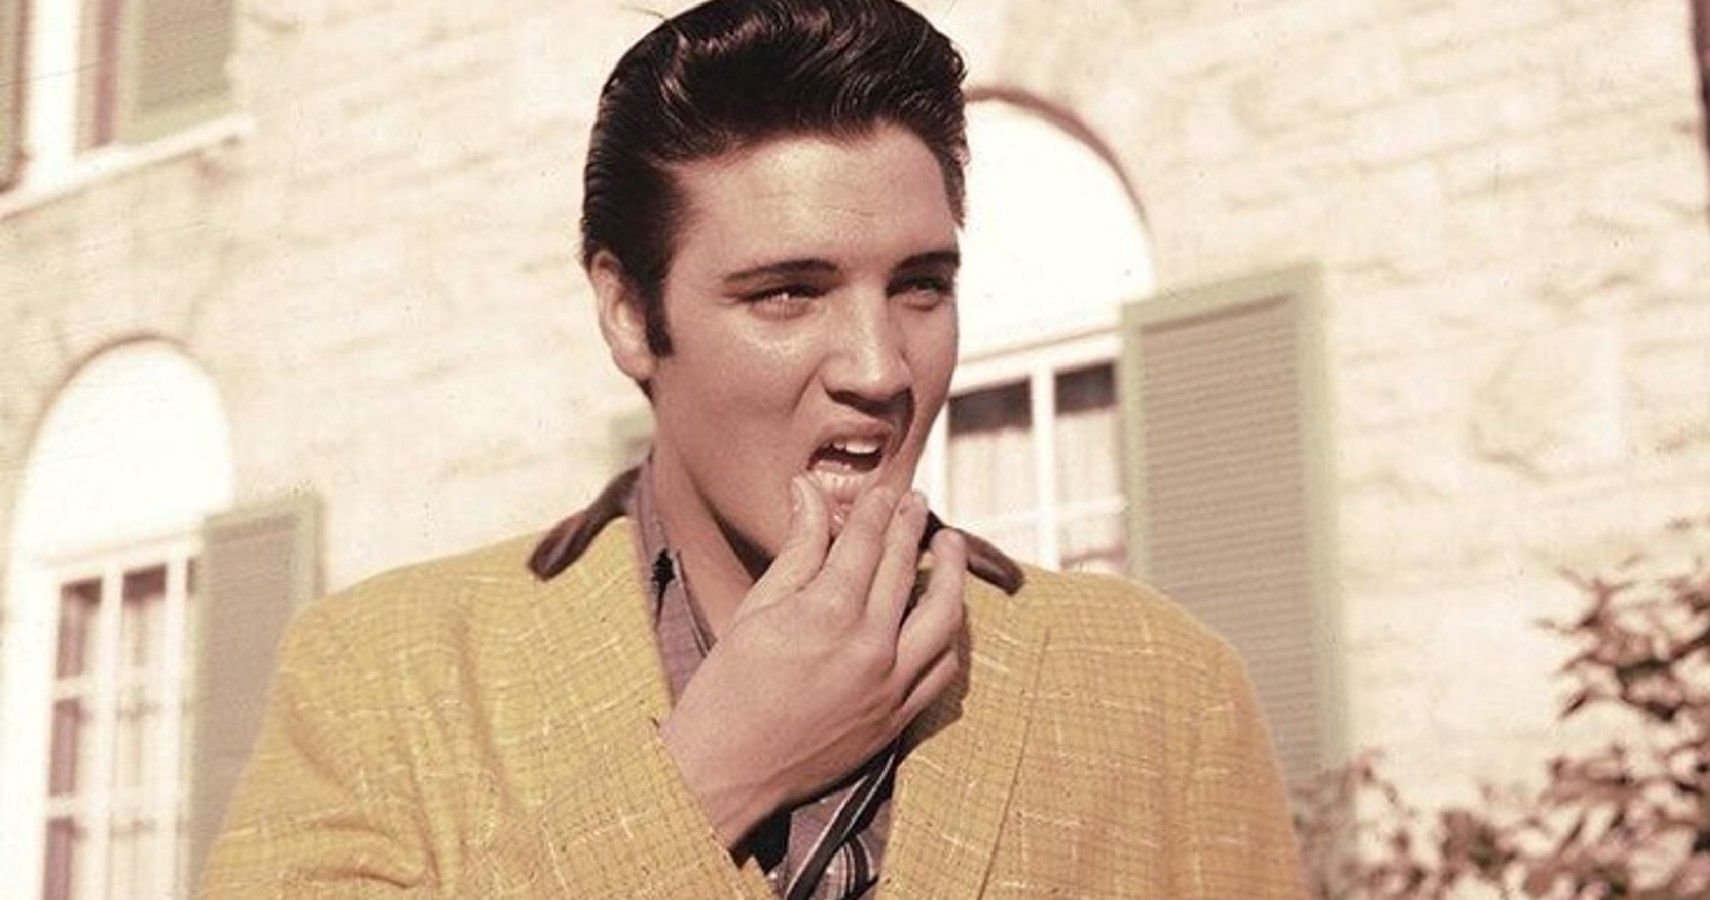 The King's Crown: Elvis Presley's Gold Dental Crown Is Up For Auction